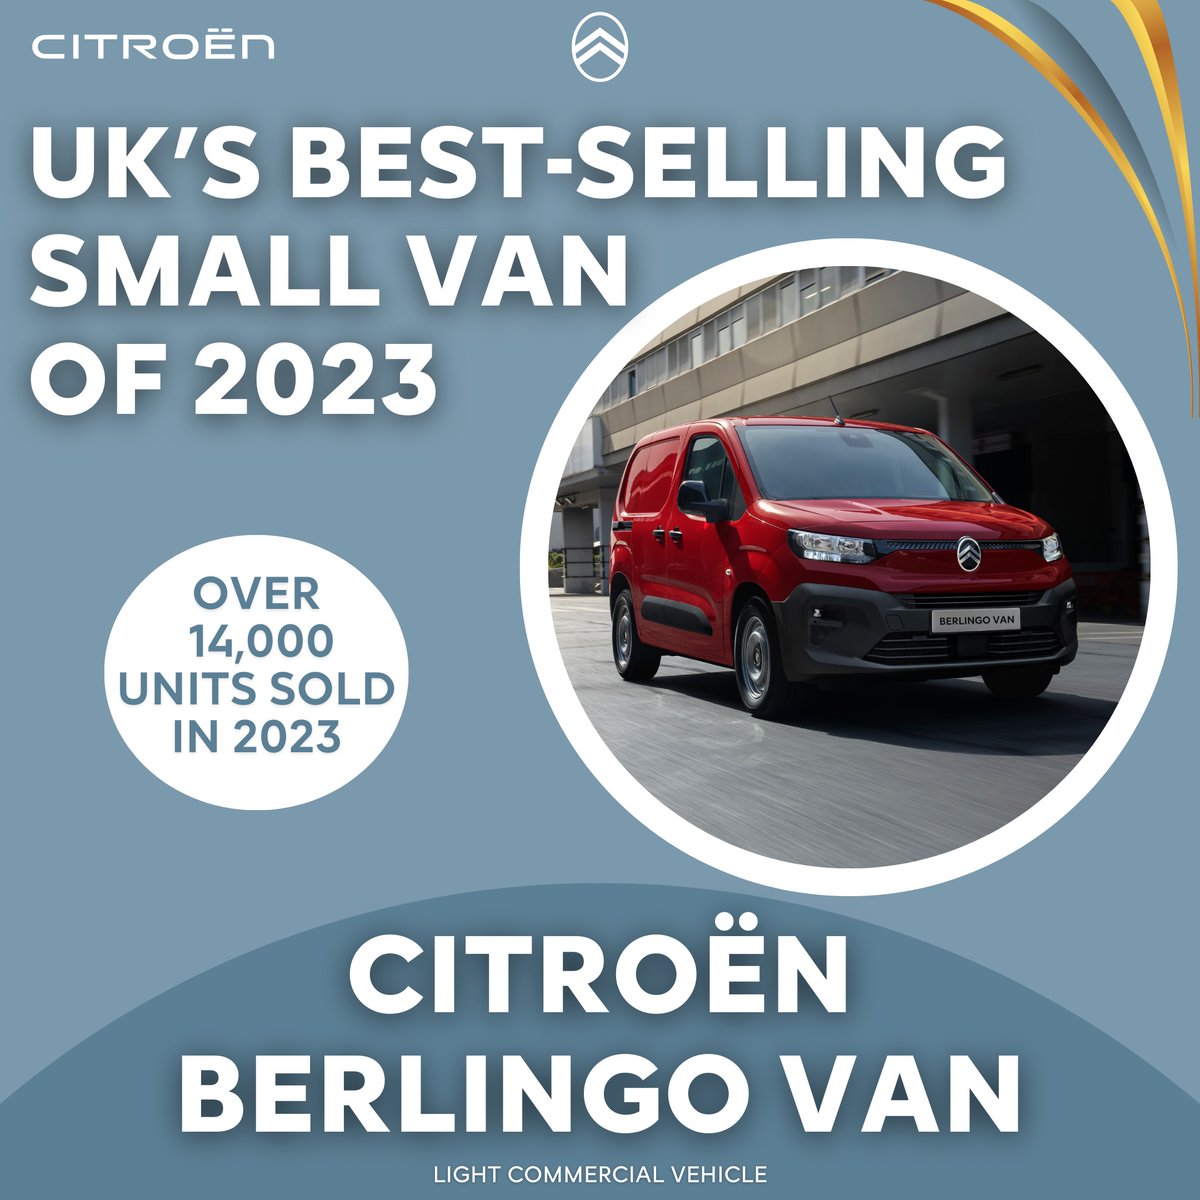 It's official🎉 Citroën Berlingo Van was the UK's best-selling Small Van in 2023!🏆 🎊Over 14,050 Berlingo Vans were sold in 2023 👏#Citroën LCV sales saw a year-on year increase of 38% in 2023 Discover the New LCV Range: citroen.co.uk/utility-range.…